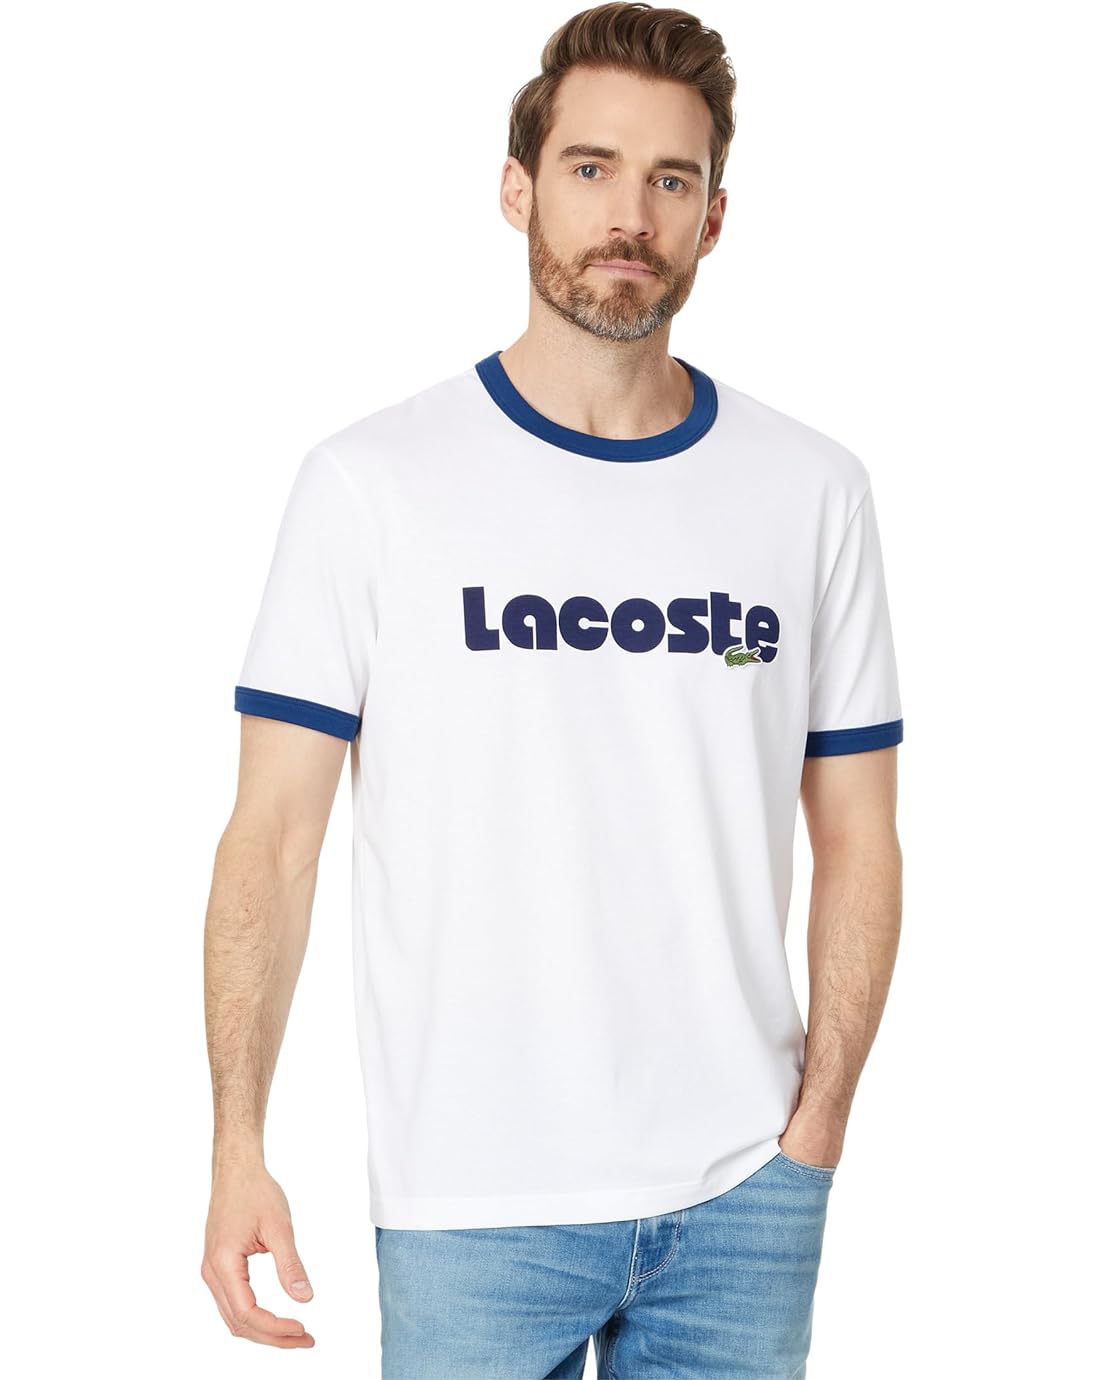 Lacoste Short Sleeve Regular Fit Tee Shirt w/ Large Lacoste Wording